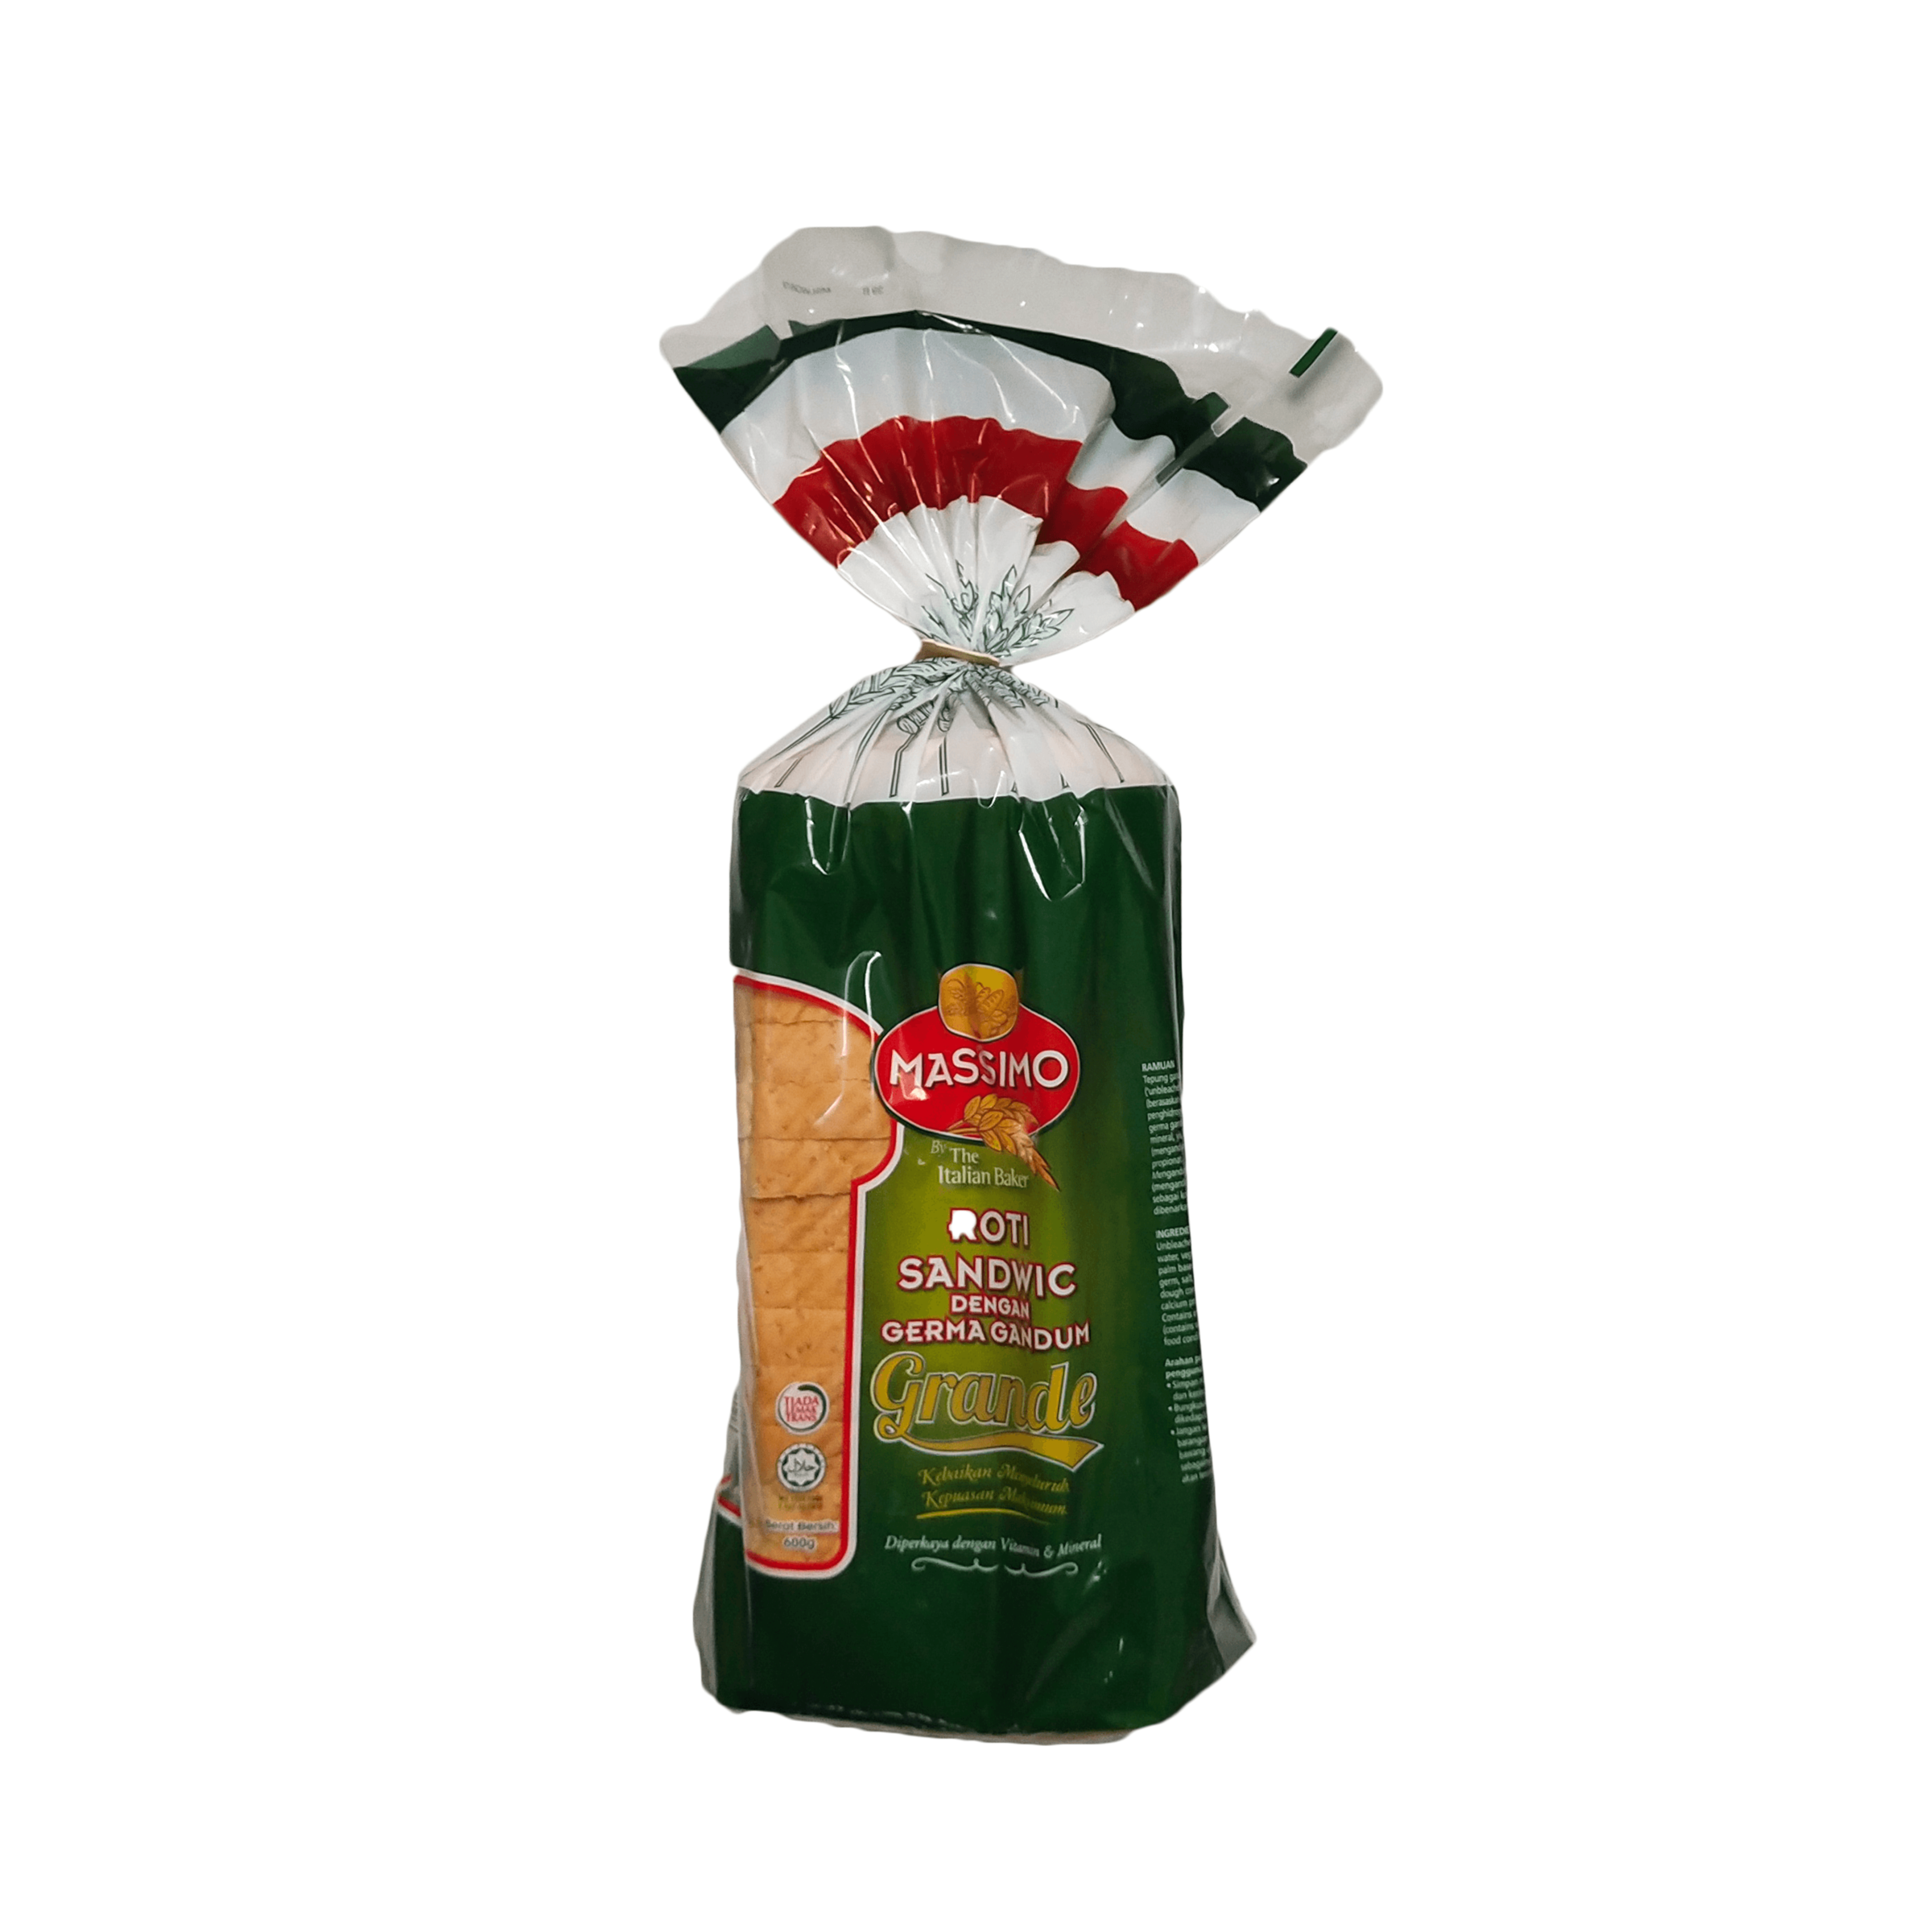 Massimo Grande Sandwich Loaf with Wheat Germ 600g.png